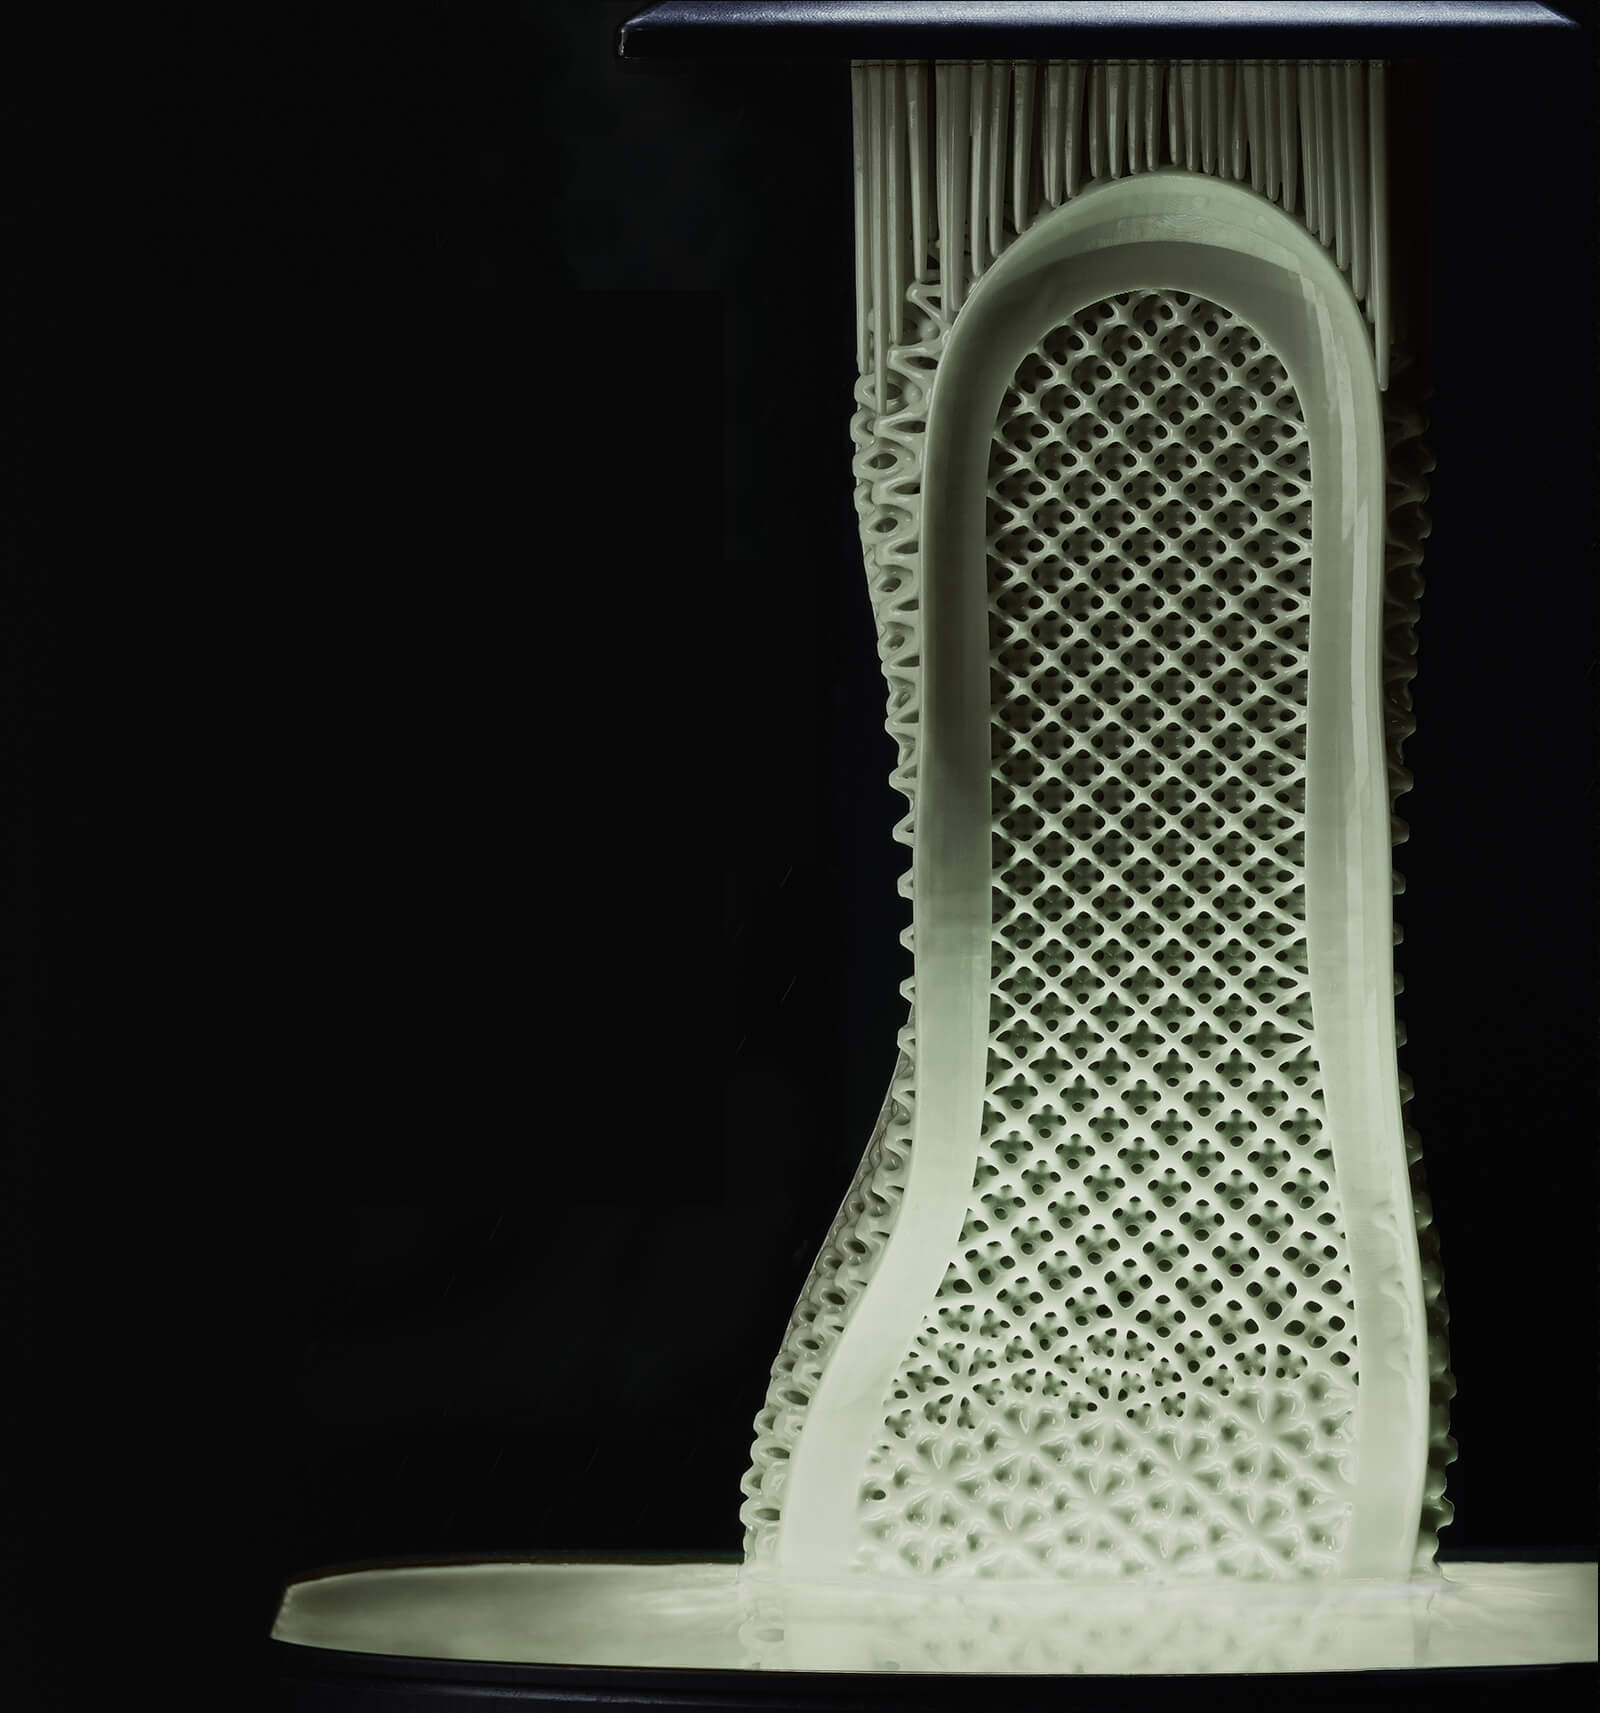  Adidas partners with Carbon to mass produce 3D printed shoe soles 